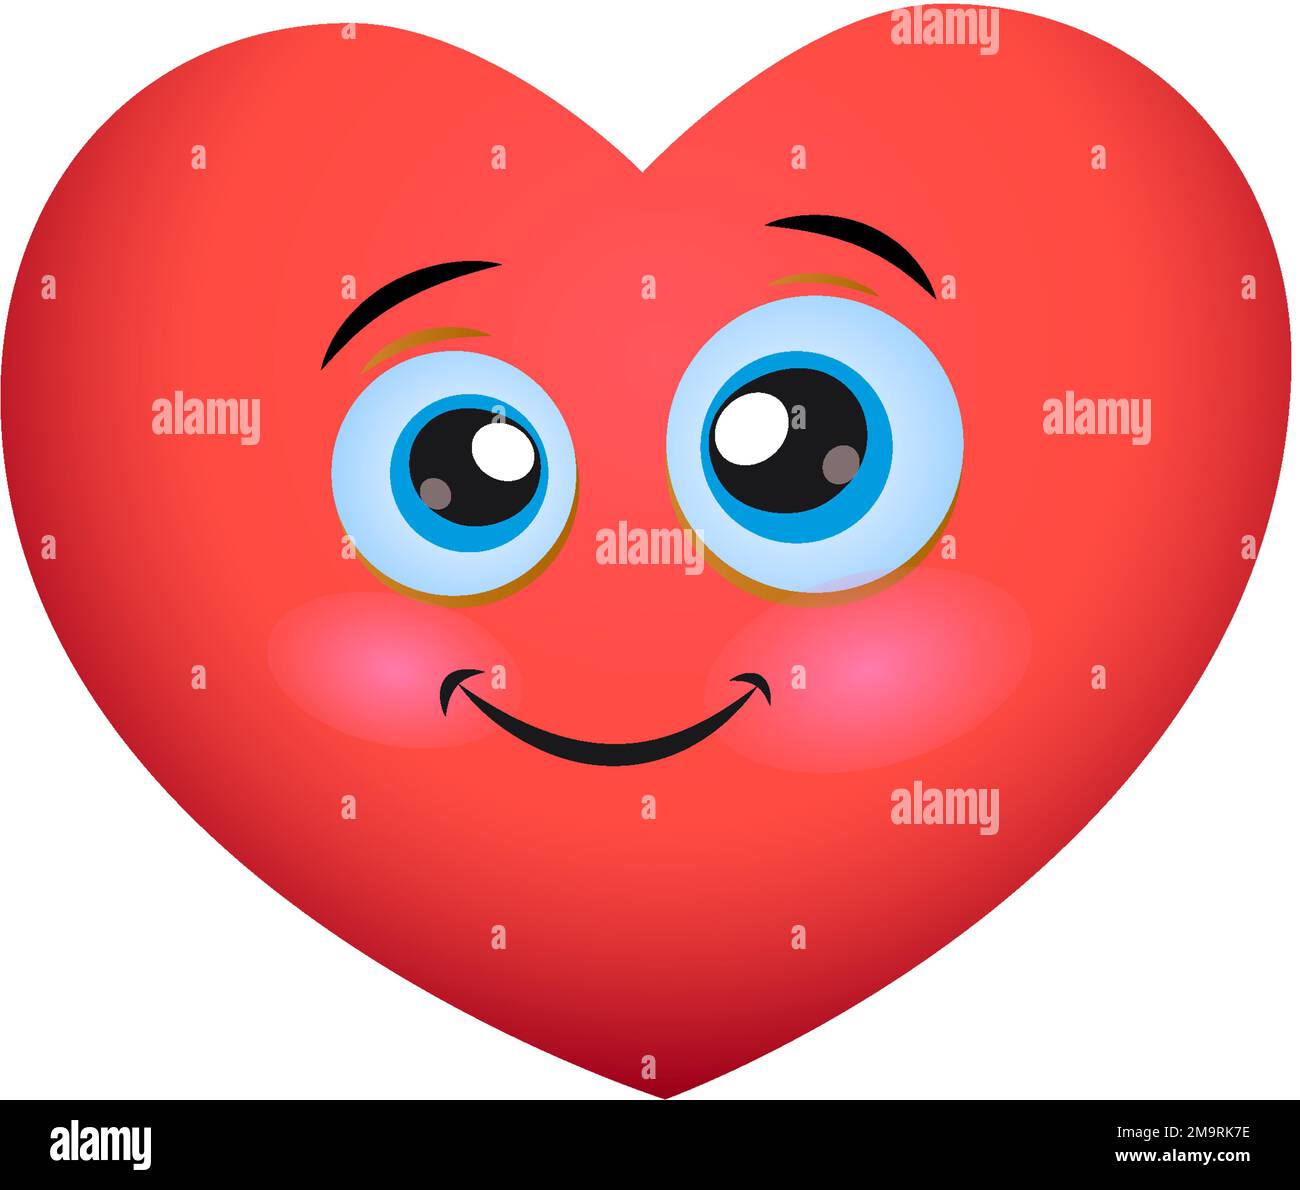 Cute red smiling heart emoji. Smiling face of cartoon heart icon ...